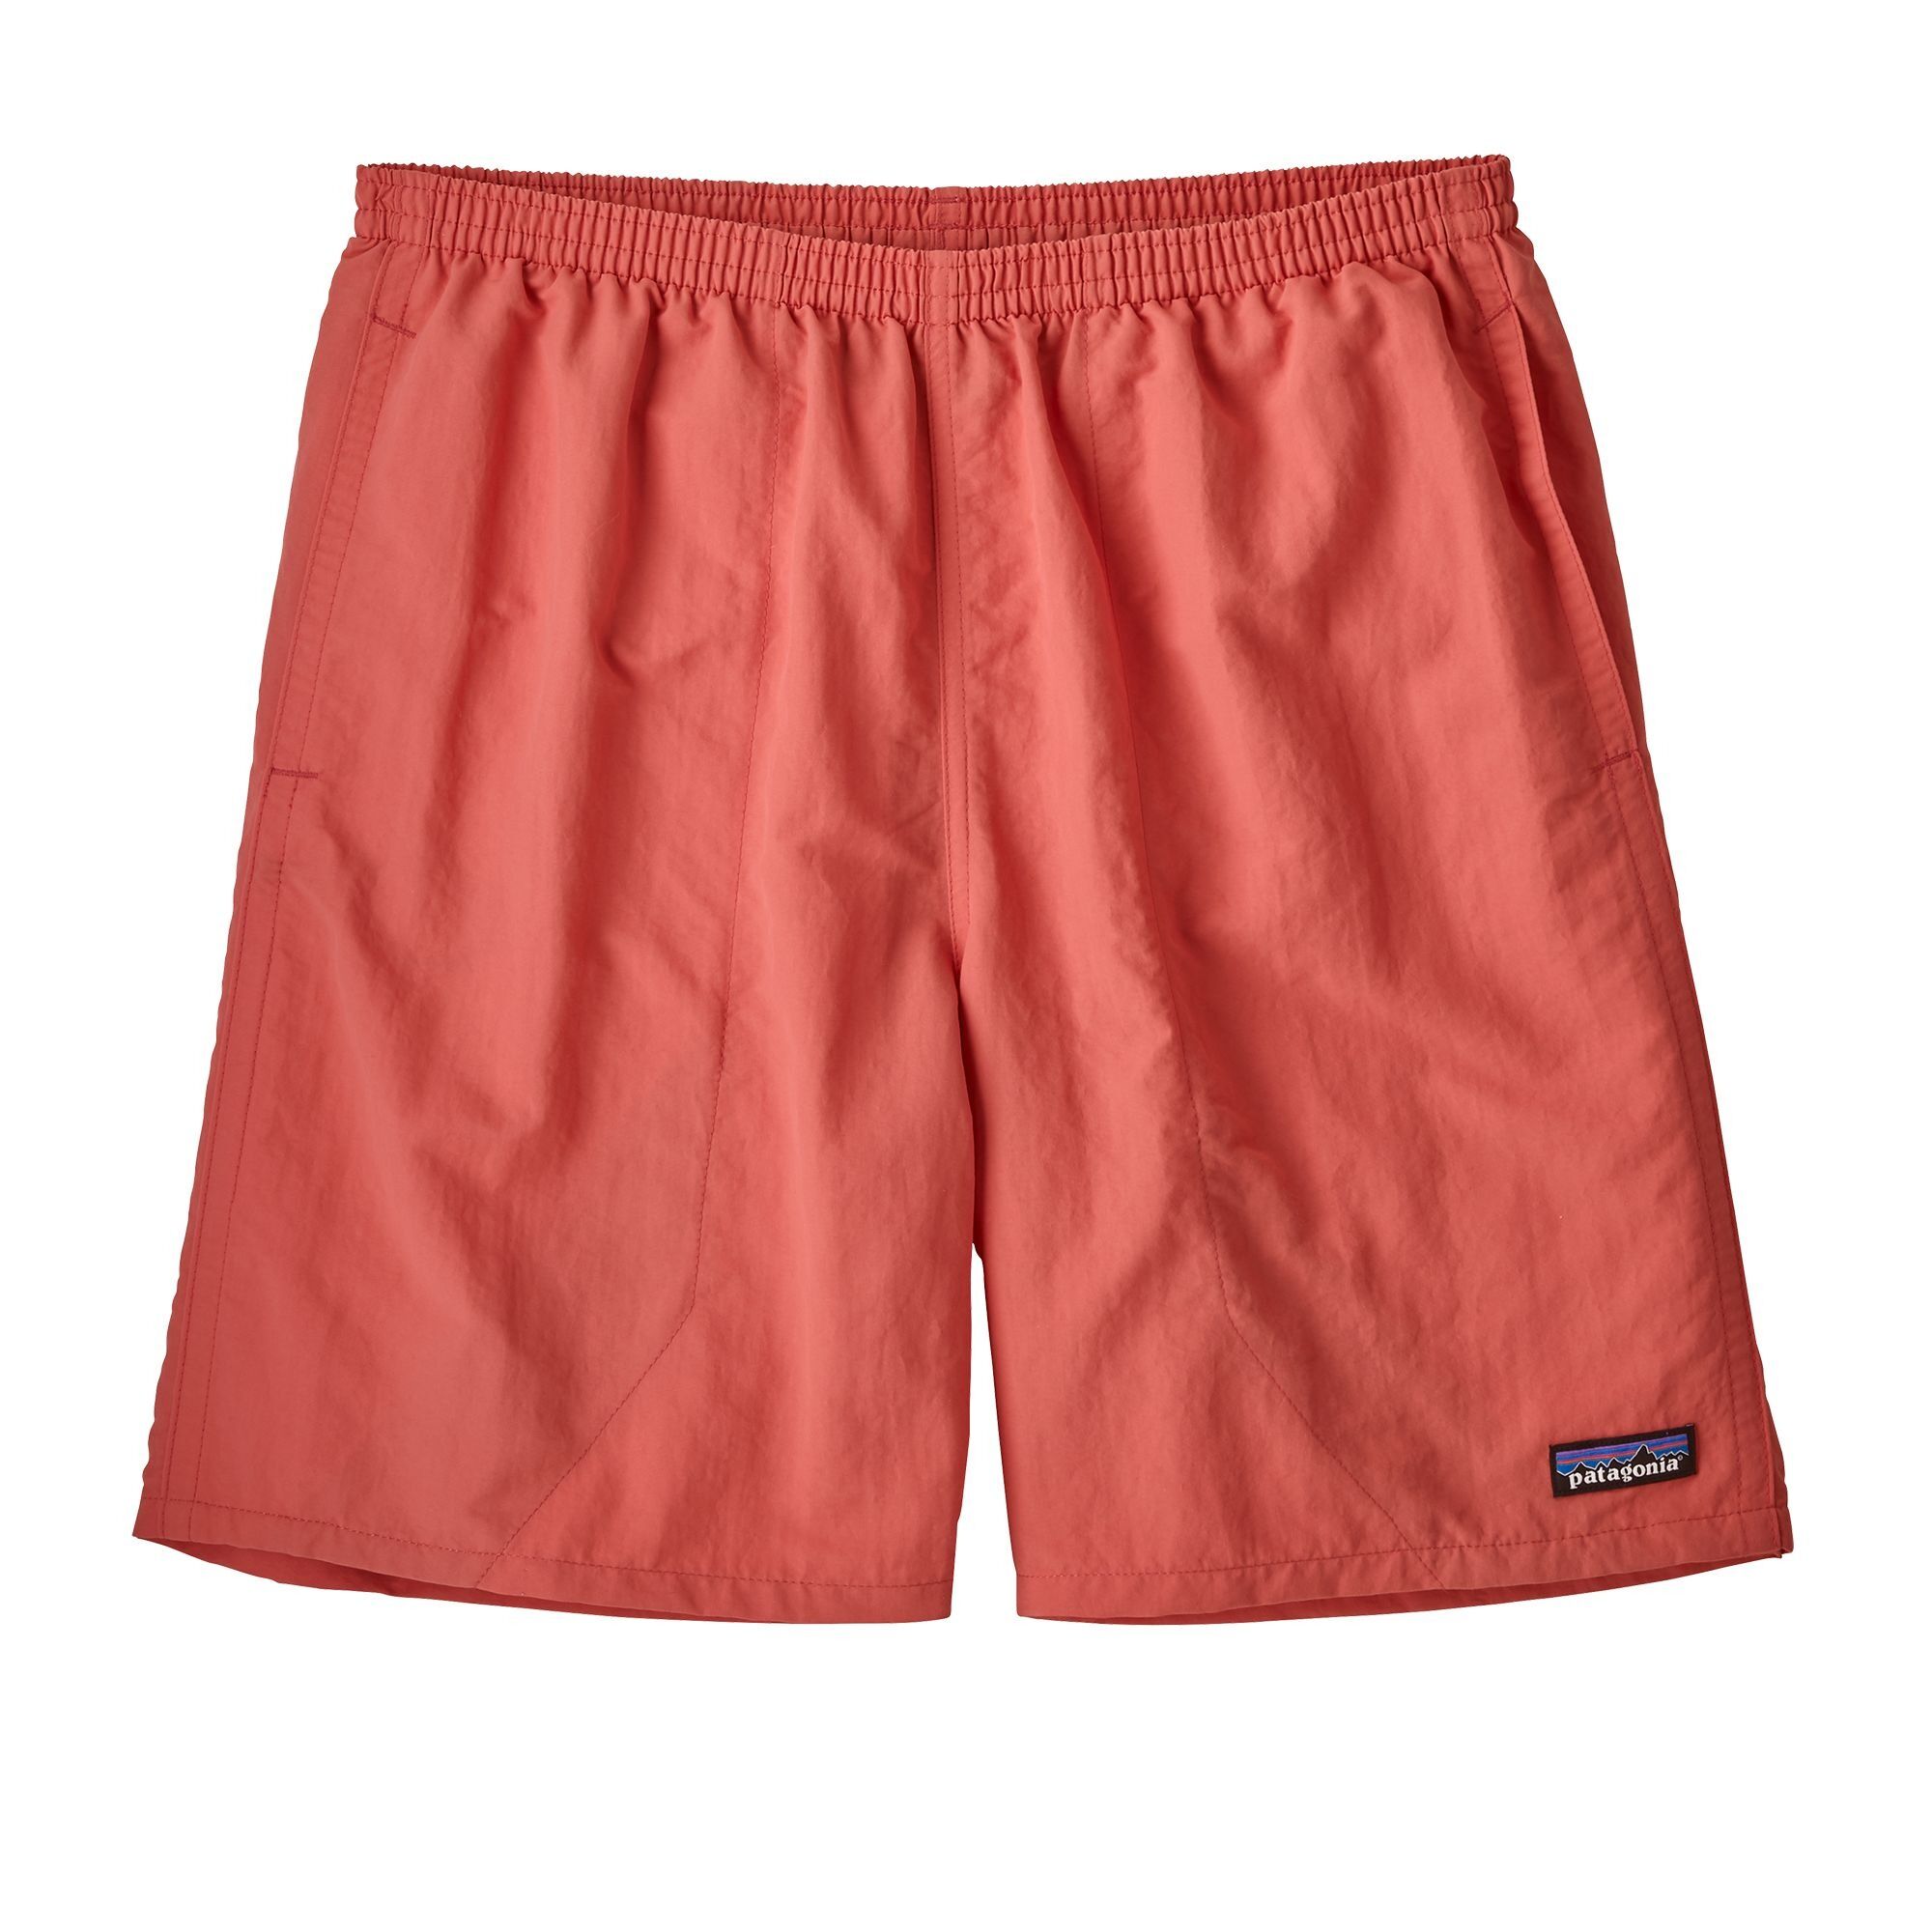 Patagonia Baggies Longs, shorts herre Spiced Coral 58034-SPCL S 2019